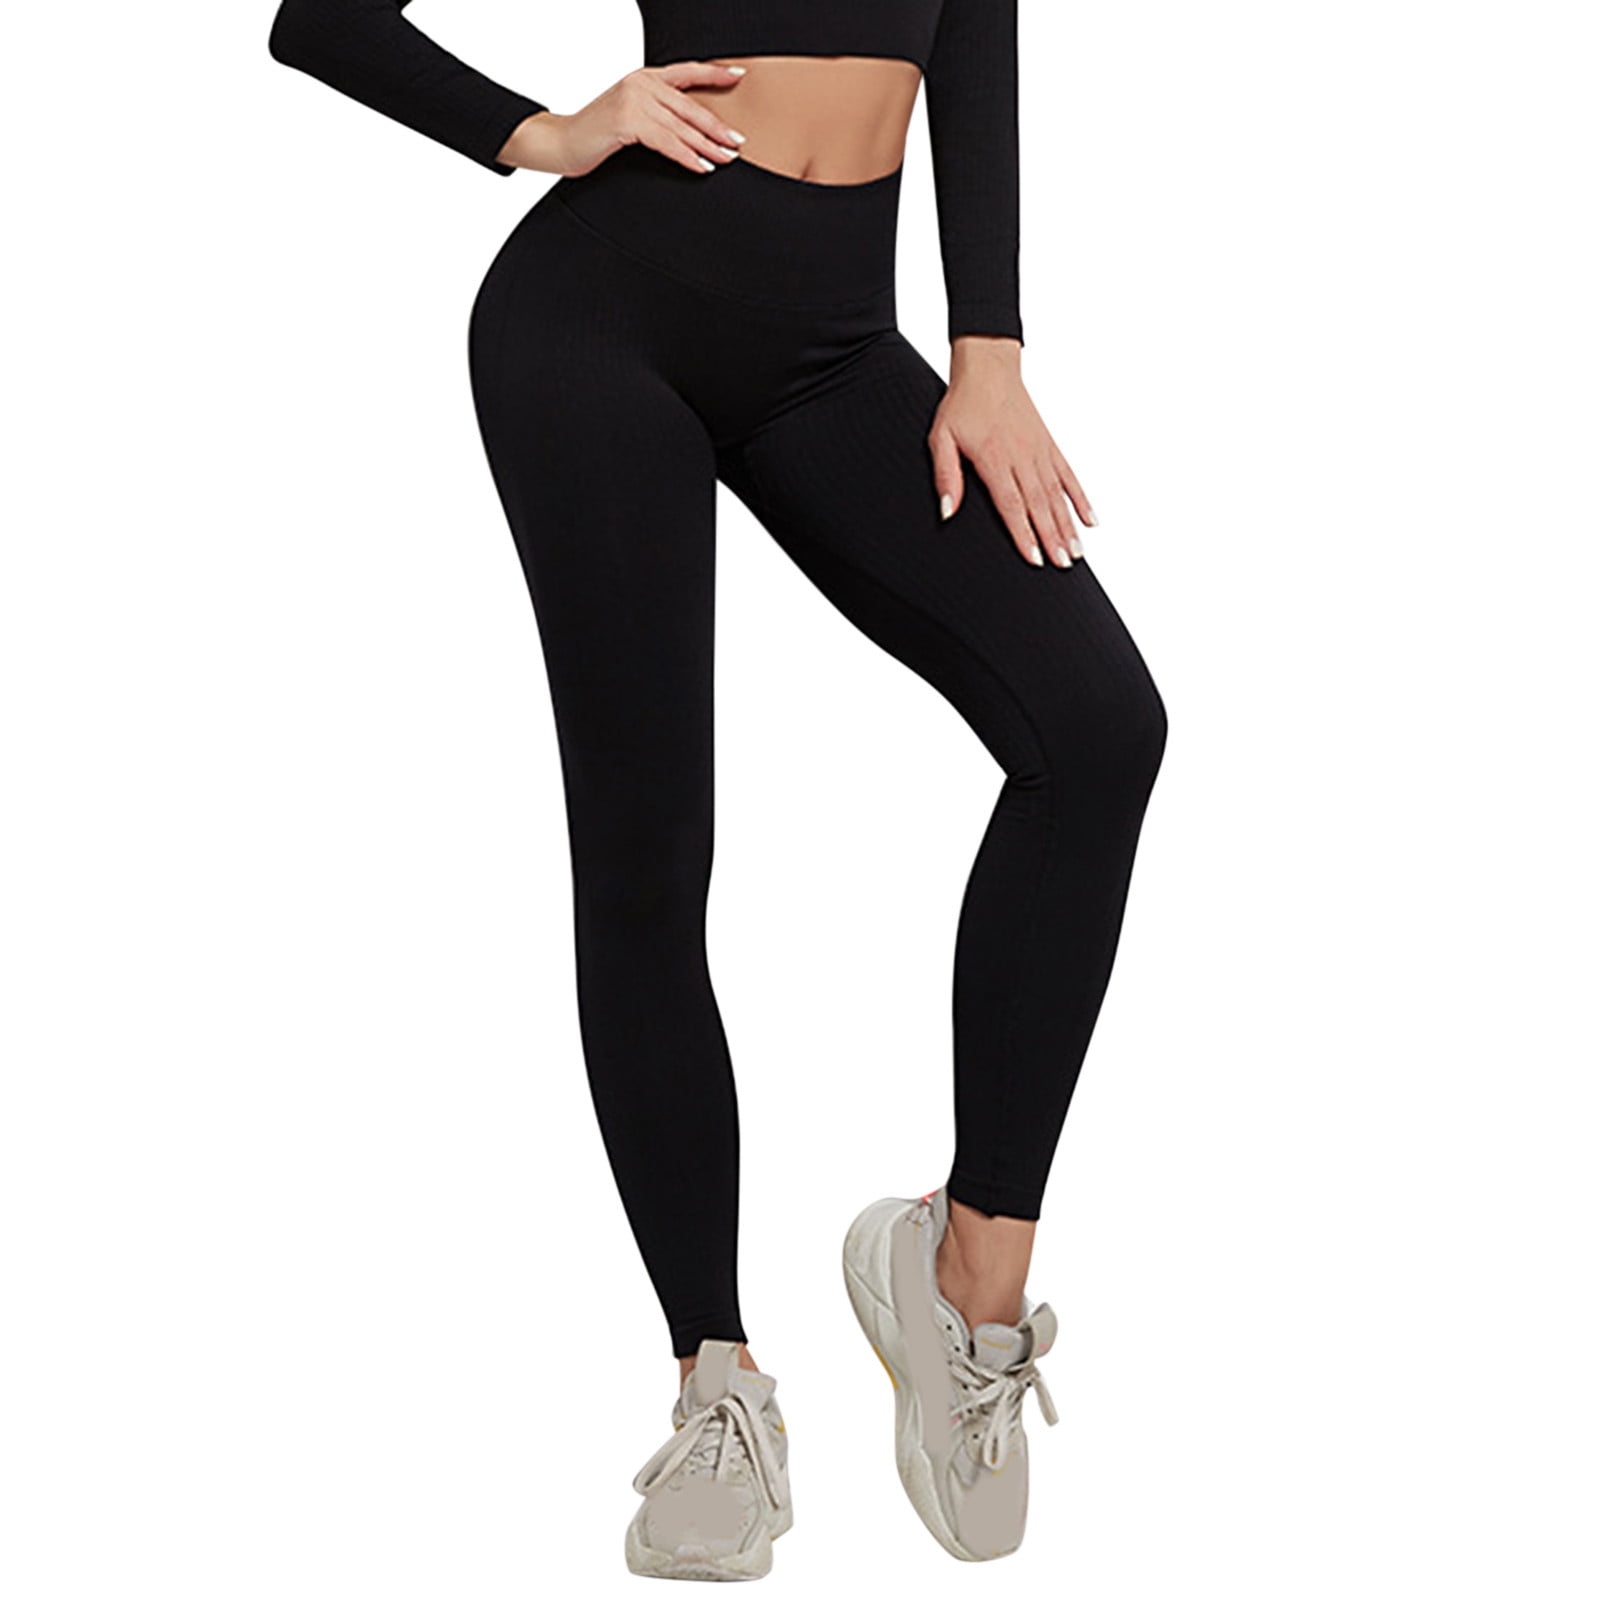 Aayomet Yoga Pants For Women Bootcut Women's Mesh Yoga Pants with 2 Pockets,  Non See-Through High Waist Tummy Control 11 Way Stretch Leggings,Black M 